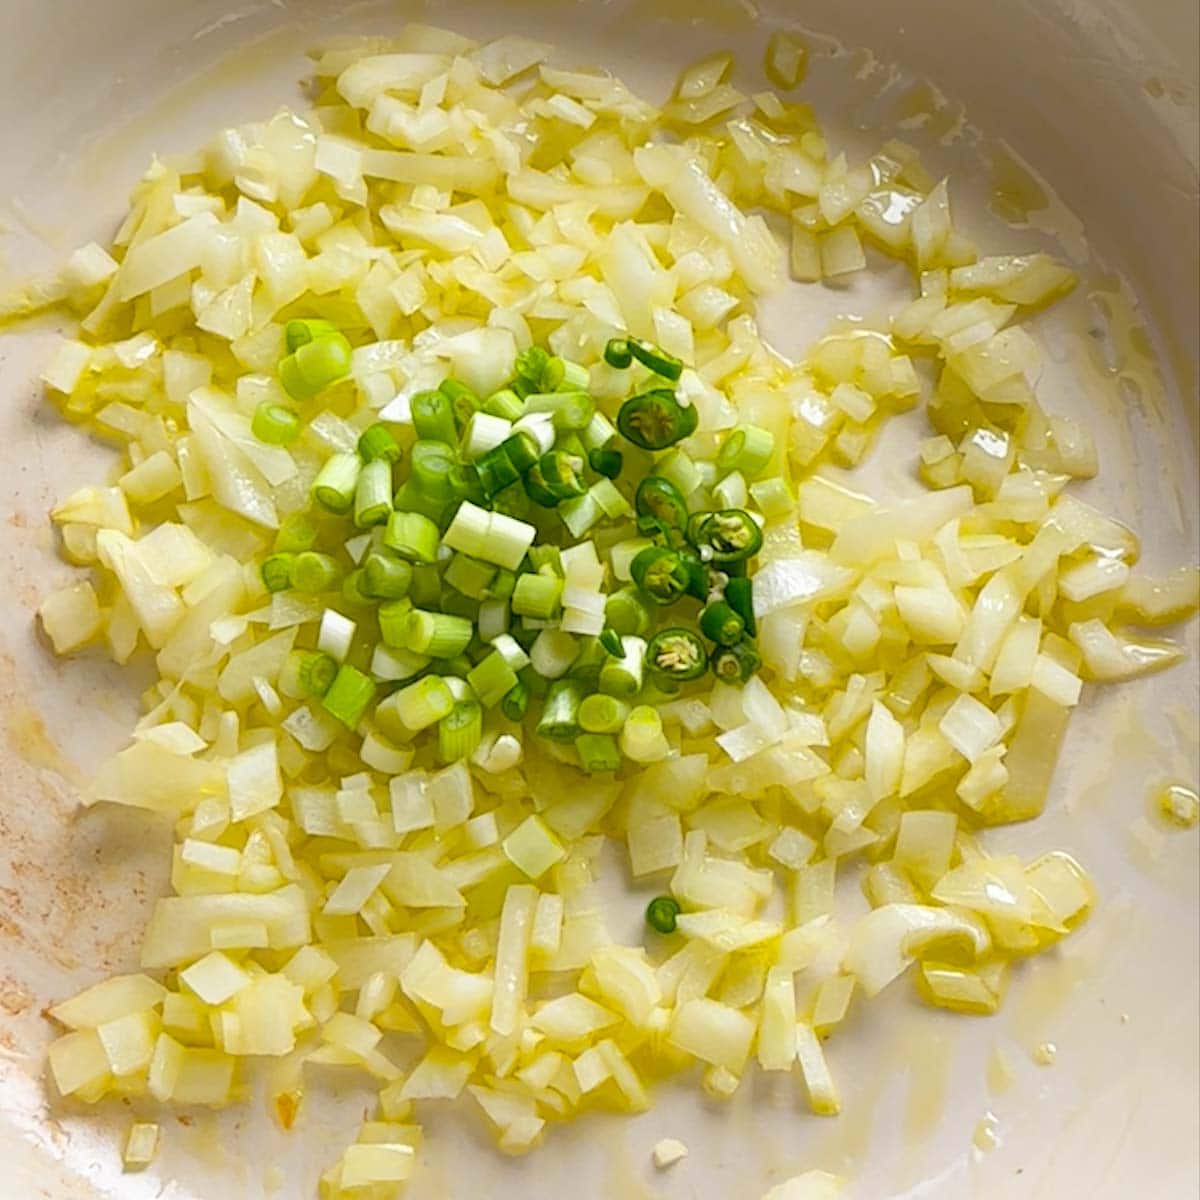 green onion and green chili added into the pan with sauteed onions